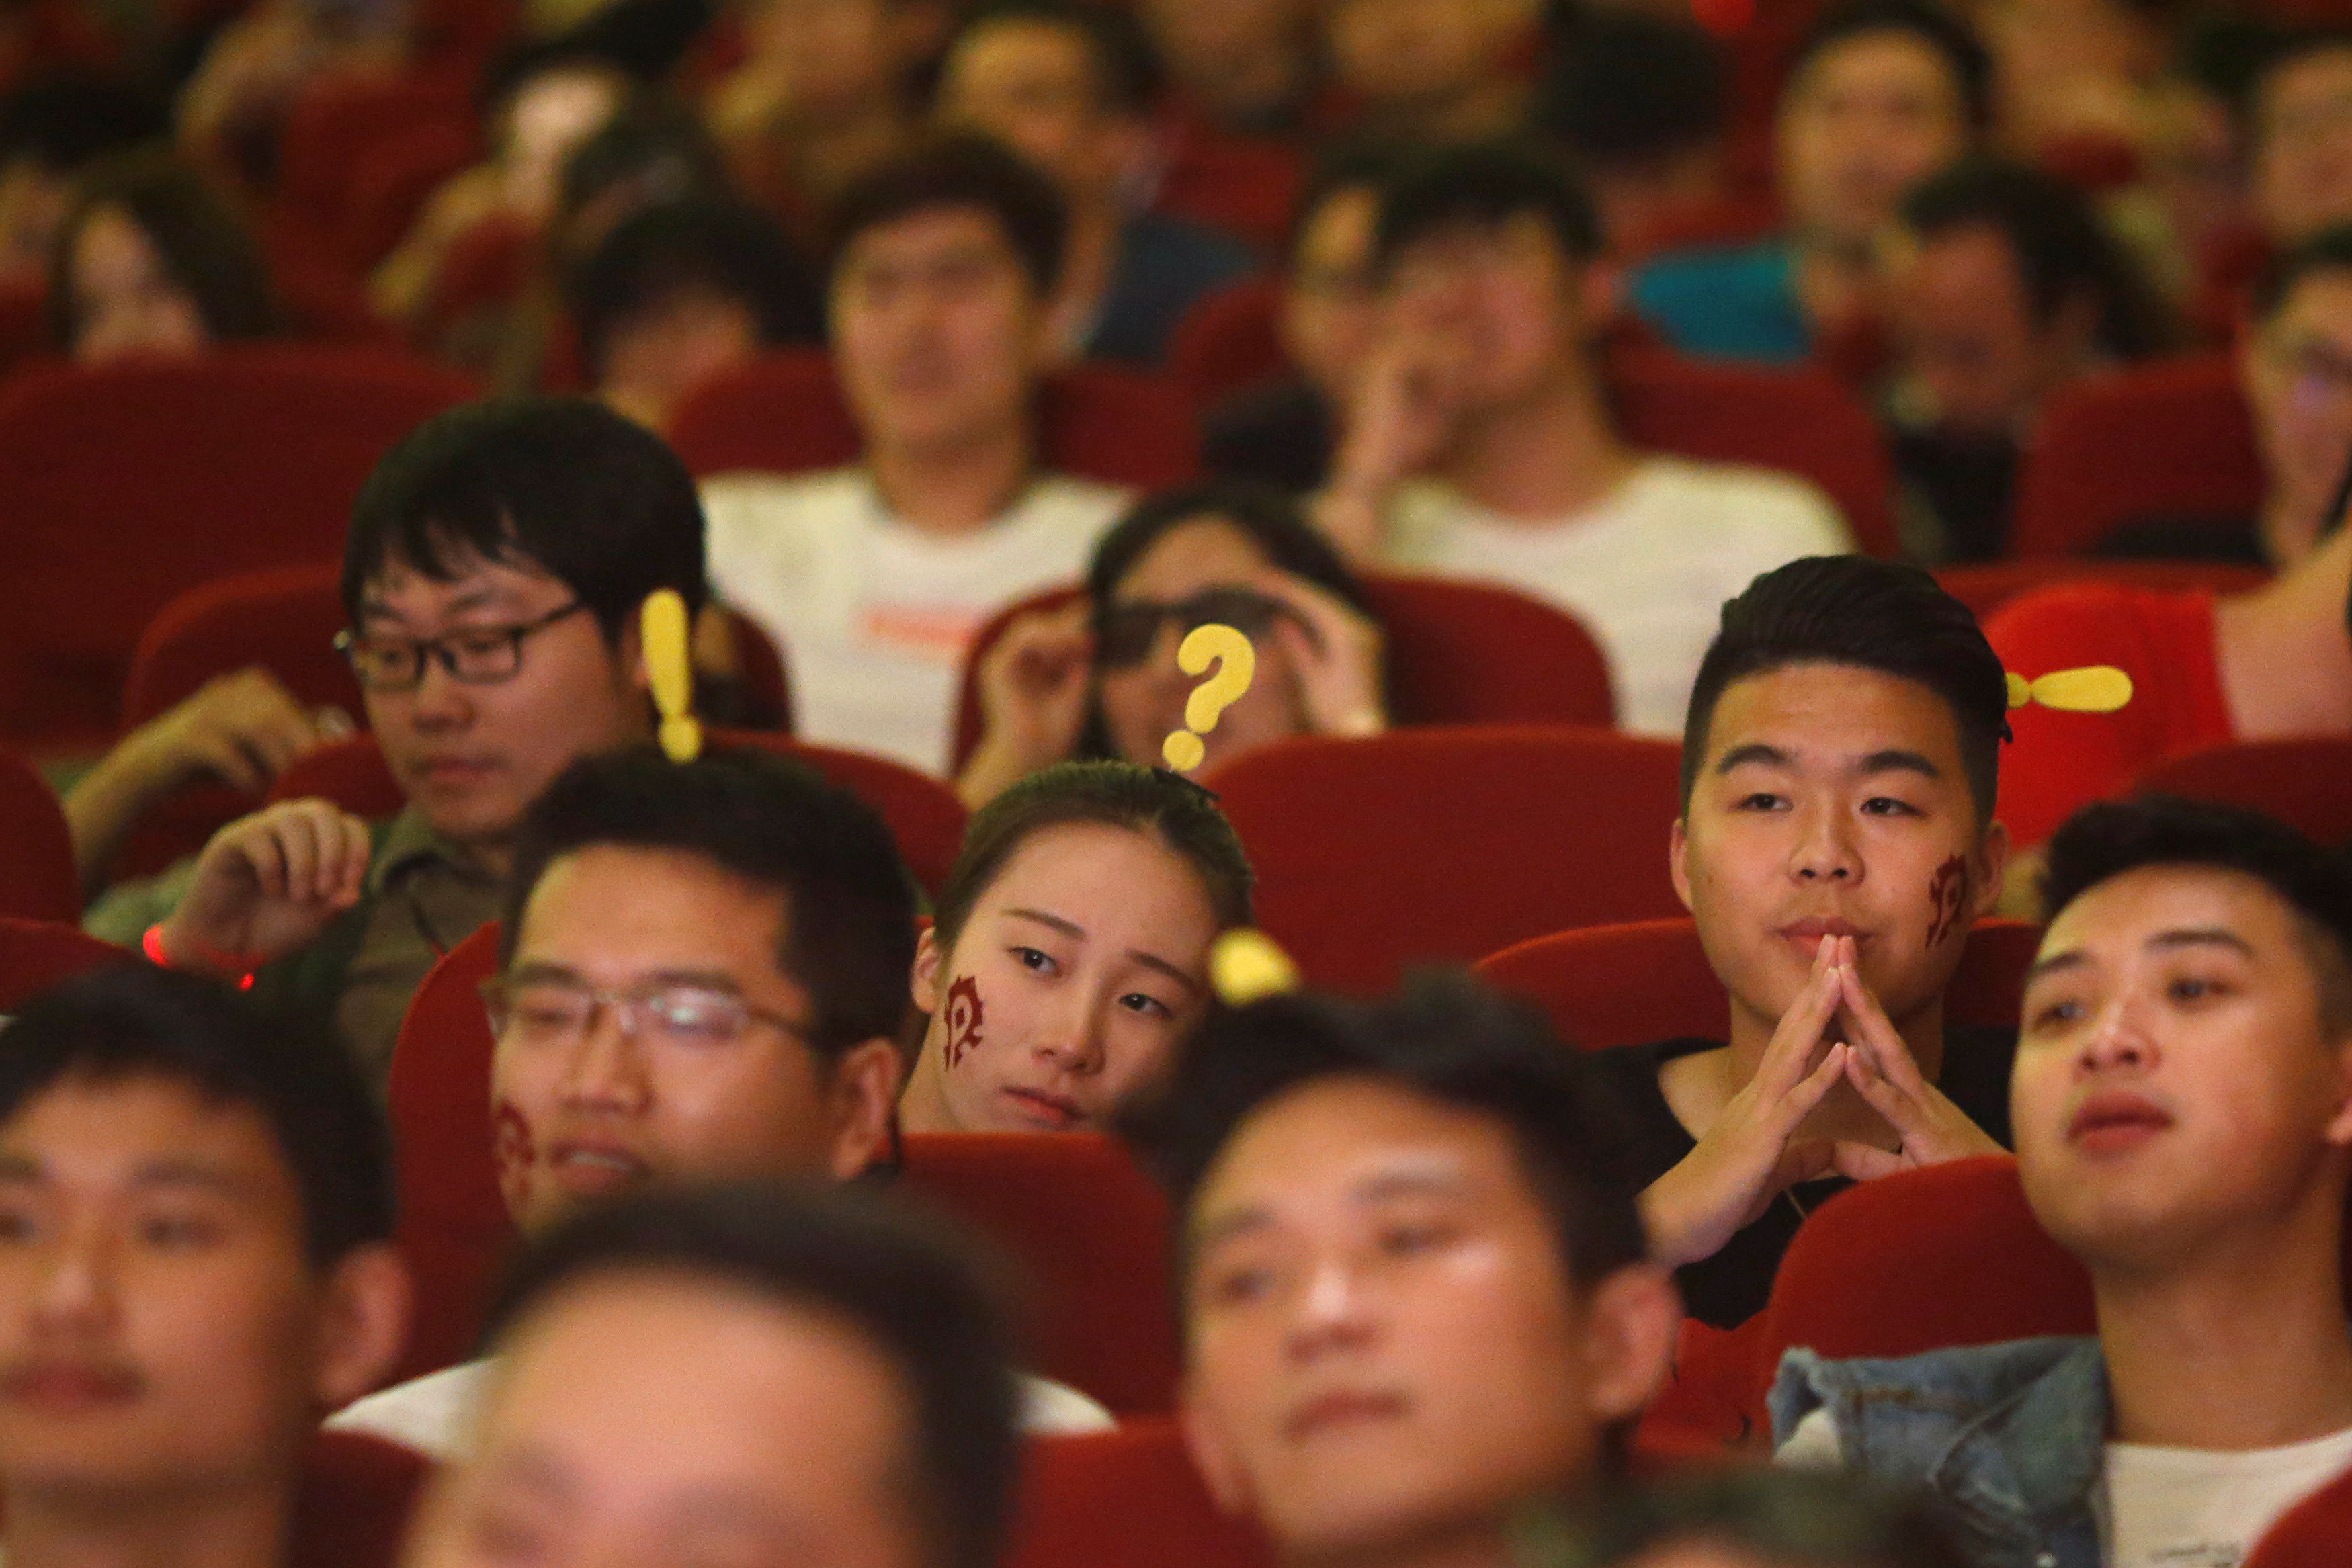 Fans attend China's premiere of the film "Warcraft" at a theatre in Shanghai